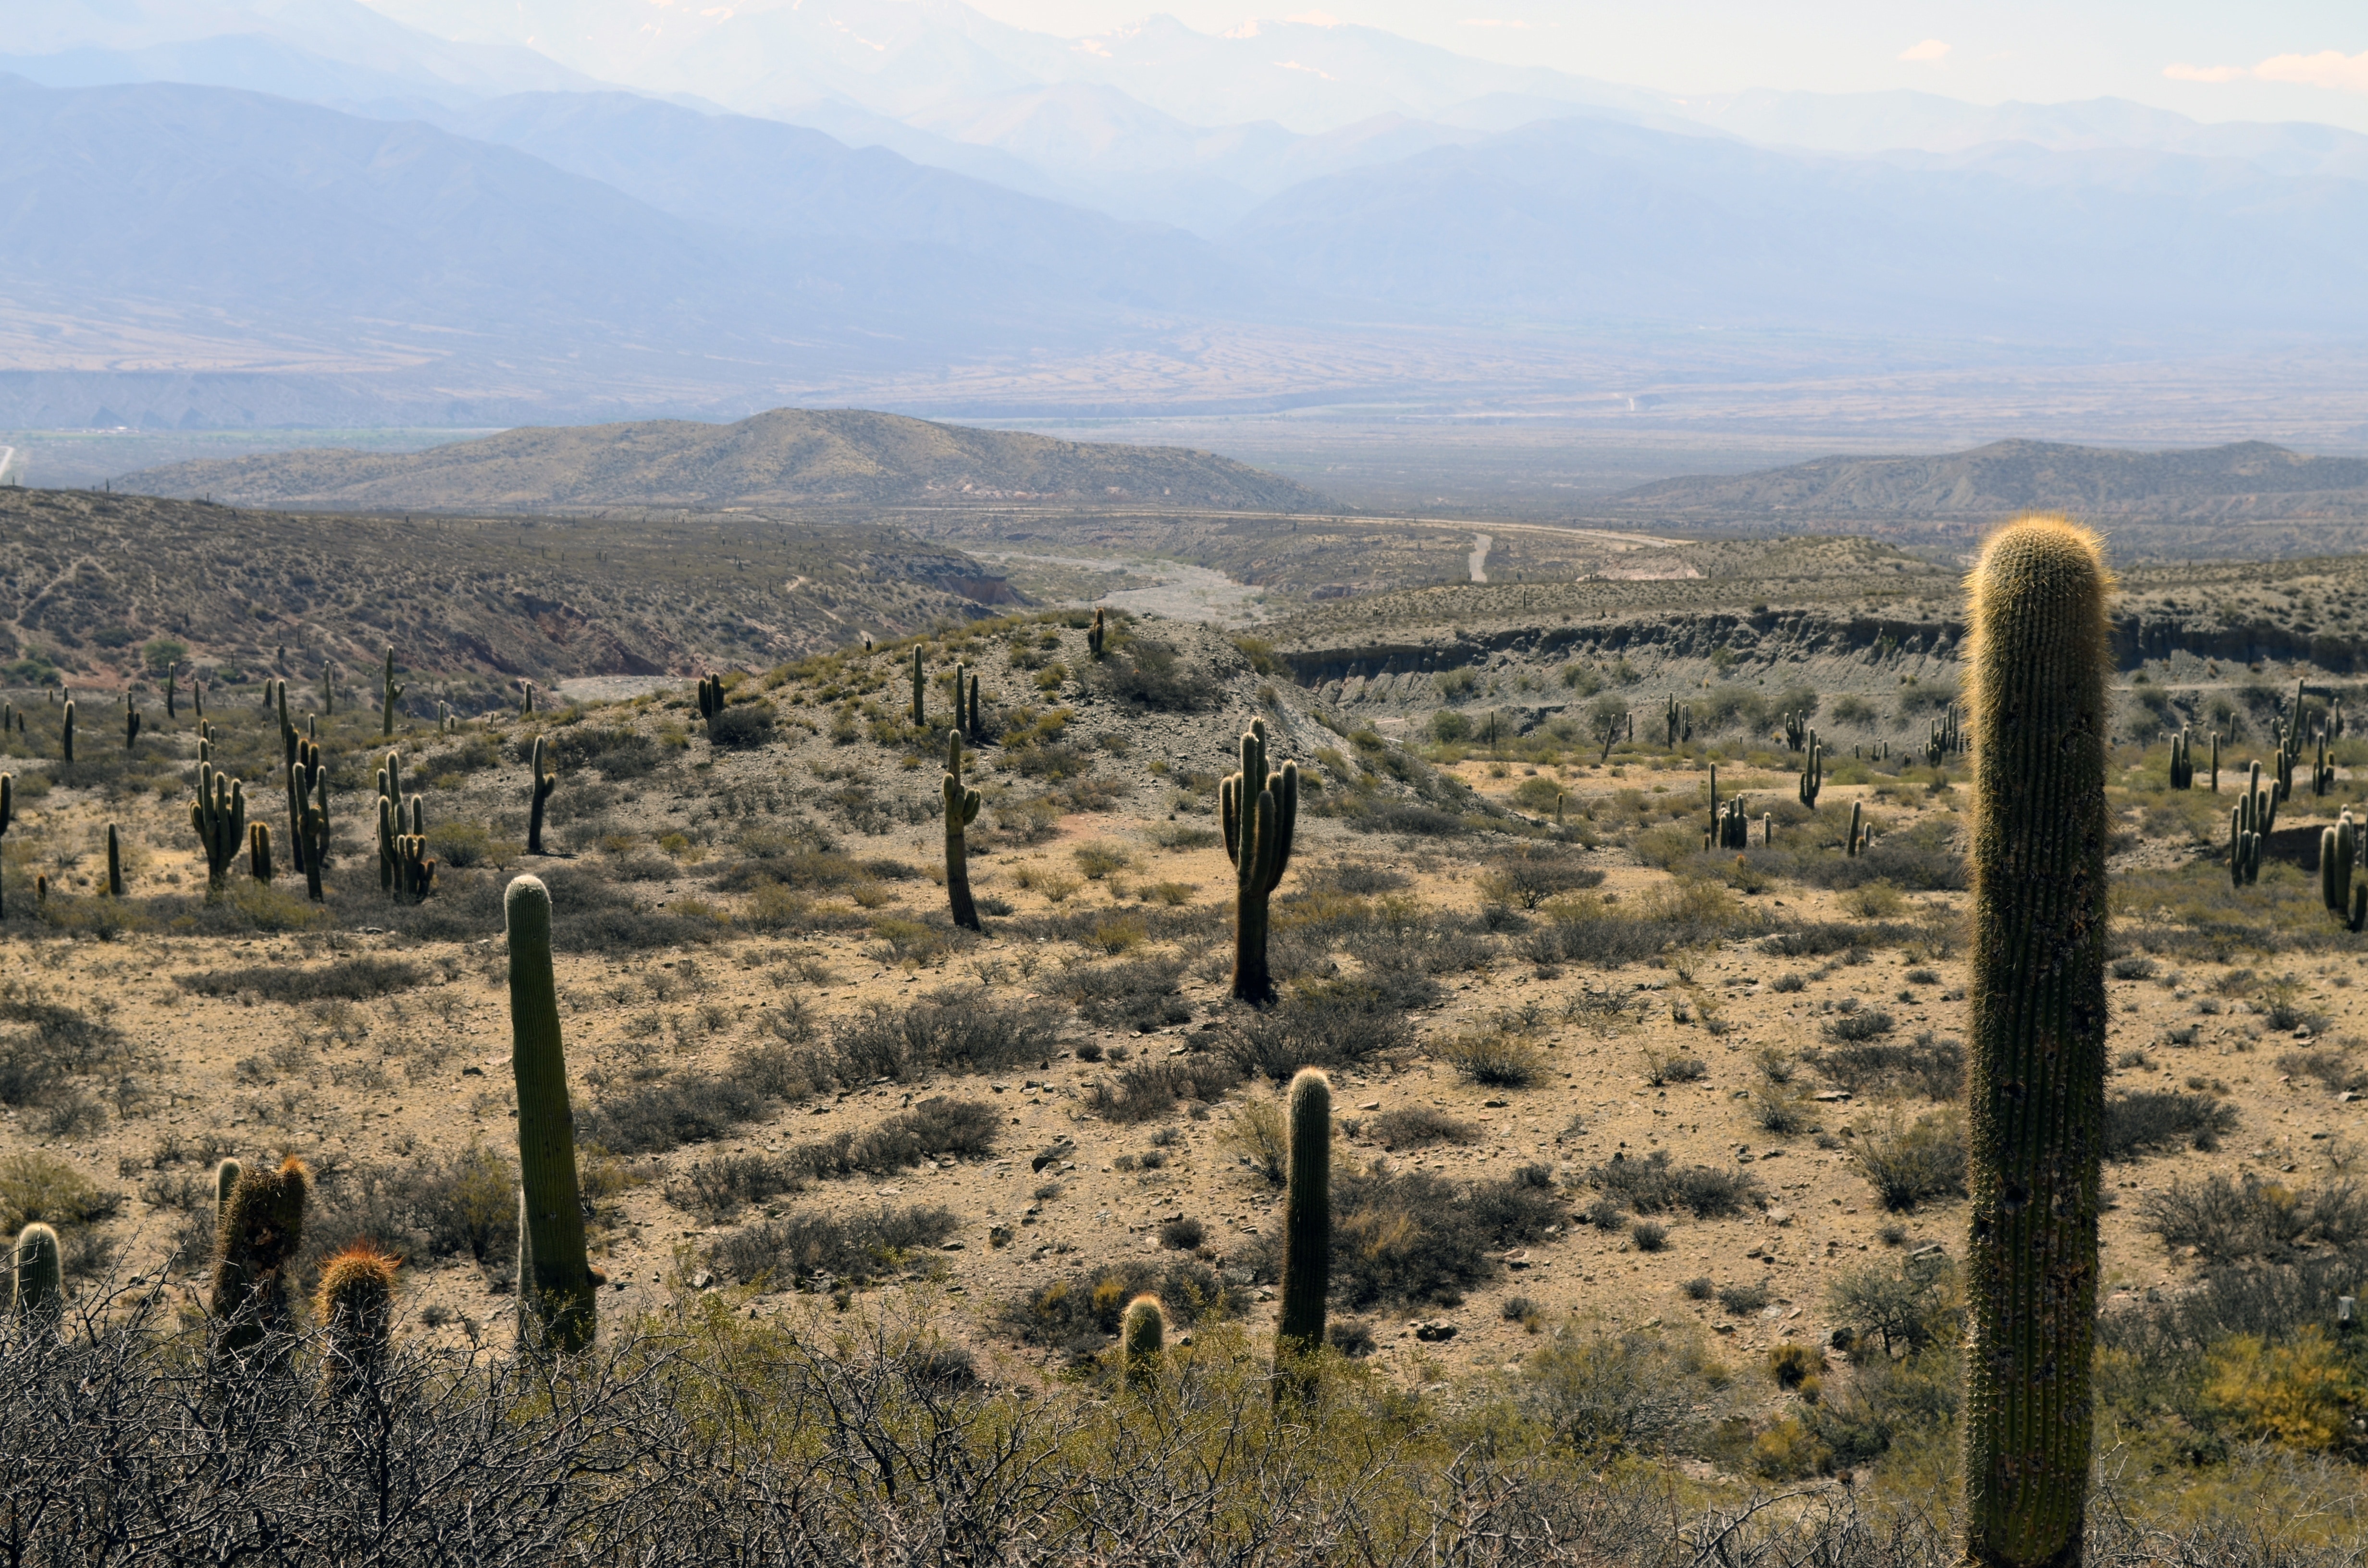 cactus field with mountain view during daytime